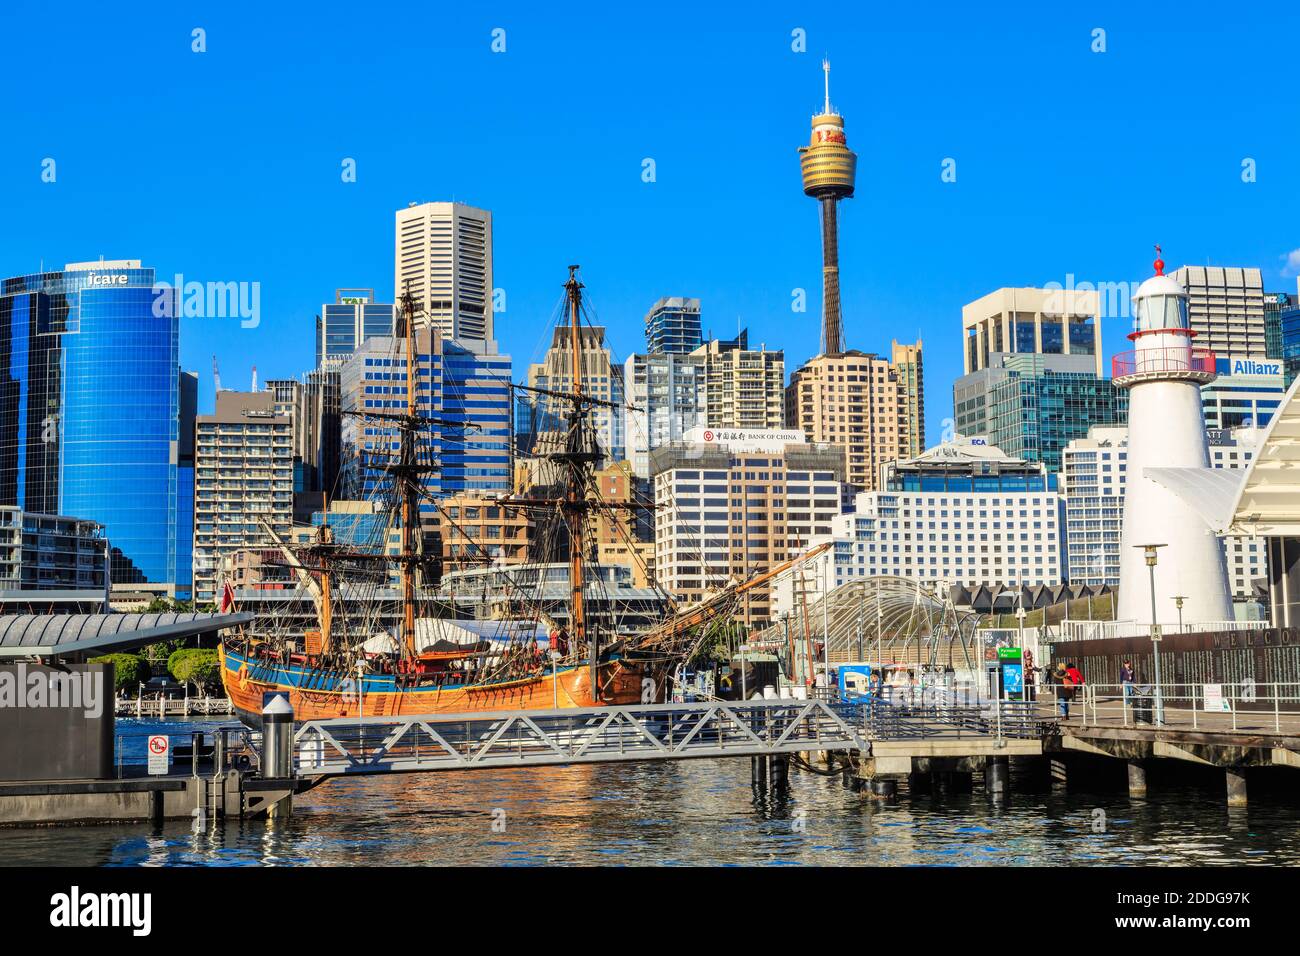 Darling Harbour, Sydney, Australia. In the foreground is a replica of Captain Cook's ship HMS 'Endeavour', with the city skyline behind Stock Photo